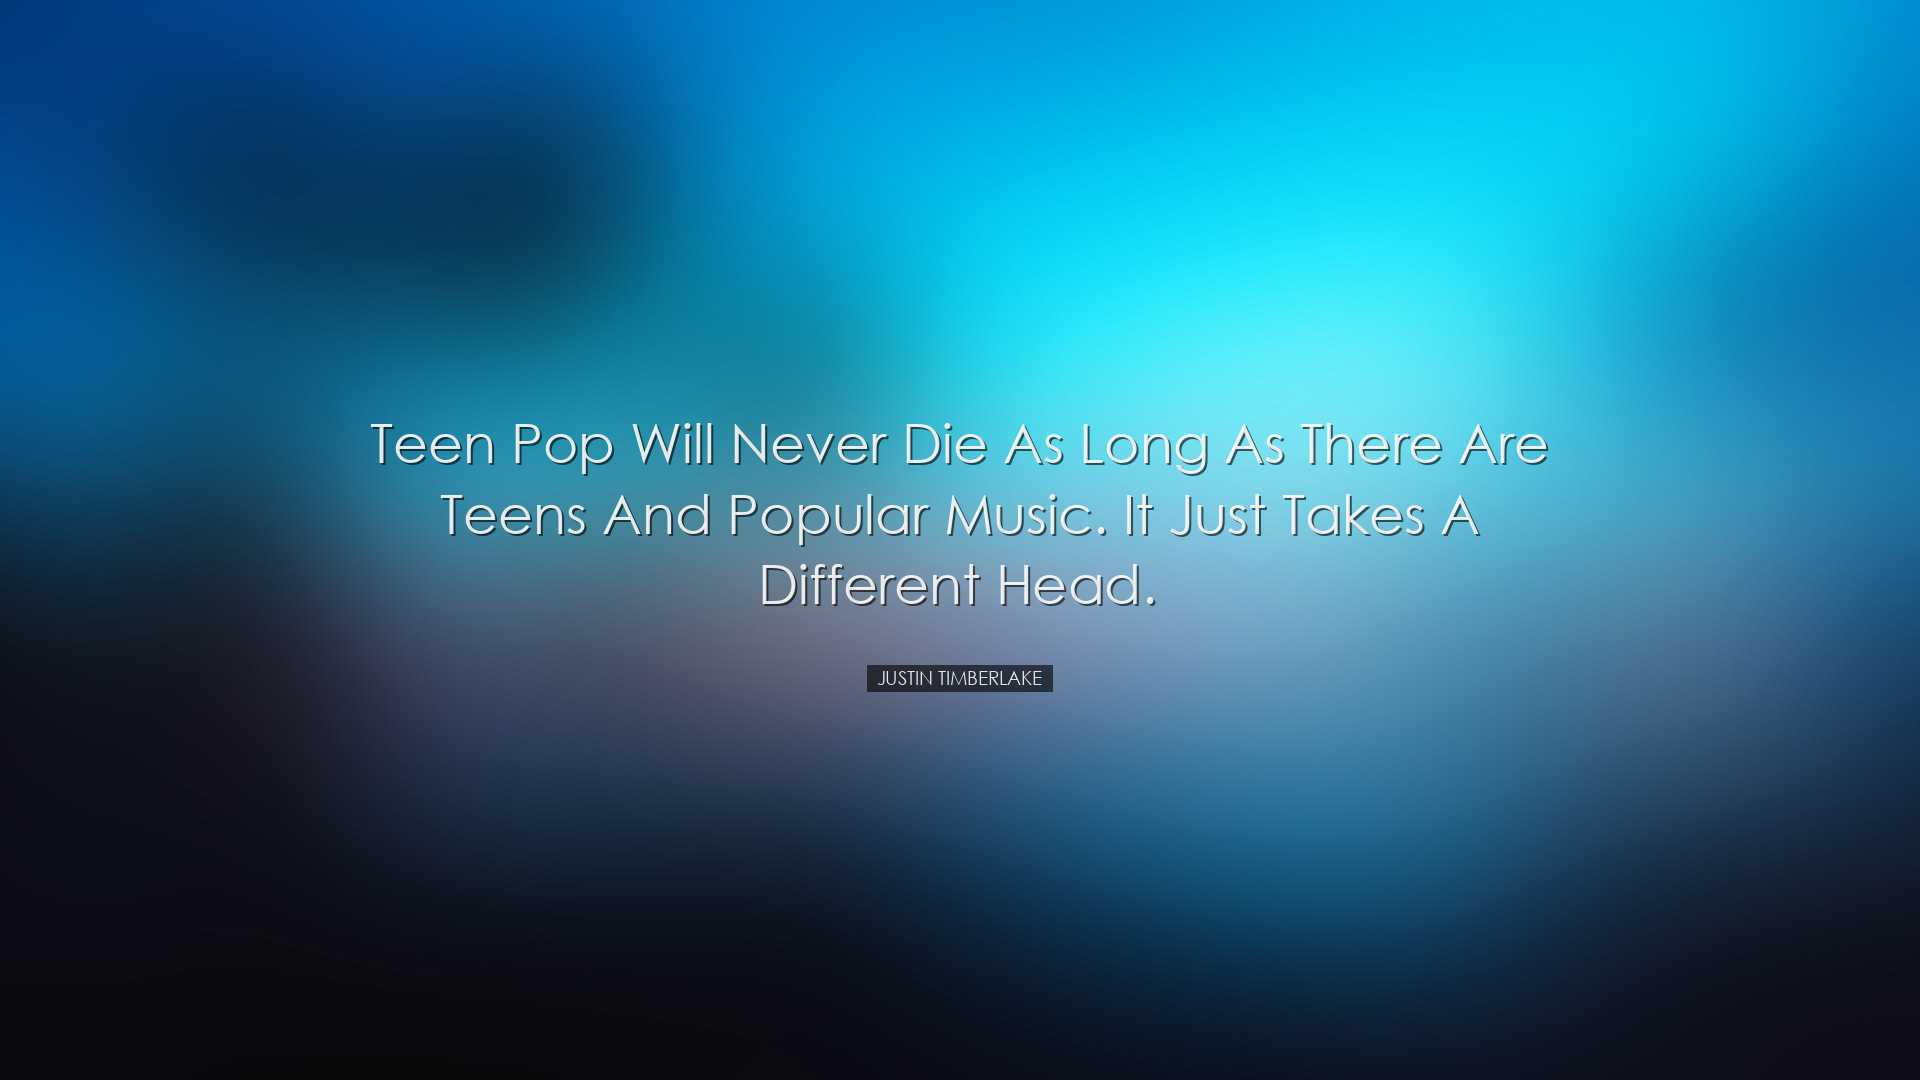 Teen pop will never die as long as there are teens and popular mus